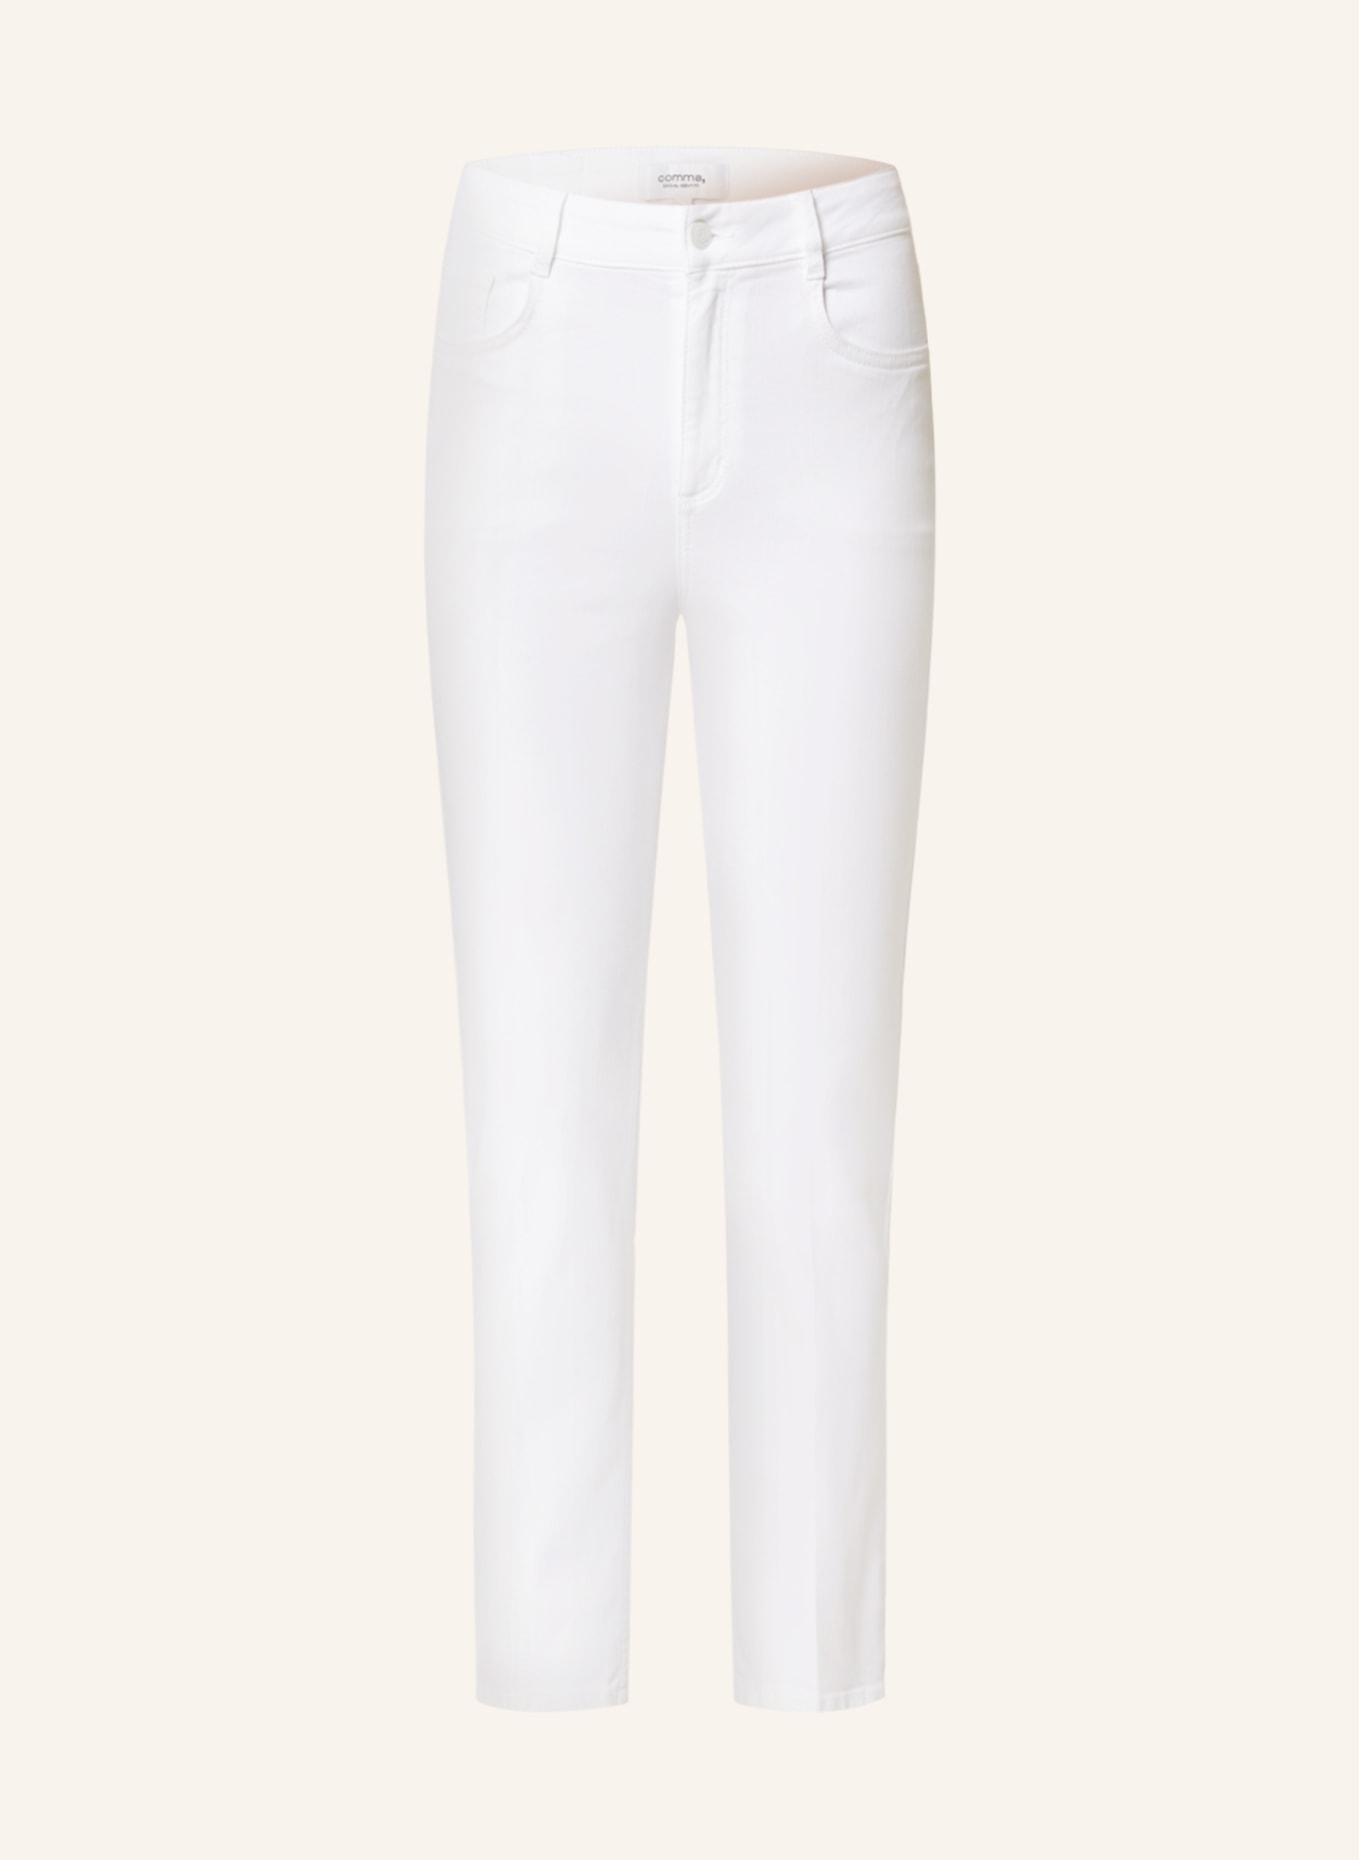 comma casual identity 7/8 pants, Color: 0100 WHITE (Image 1)